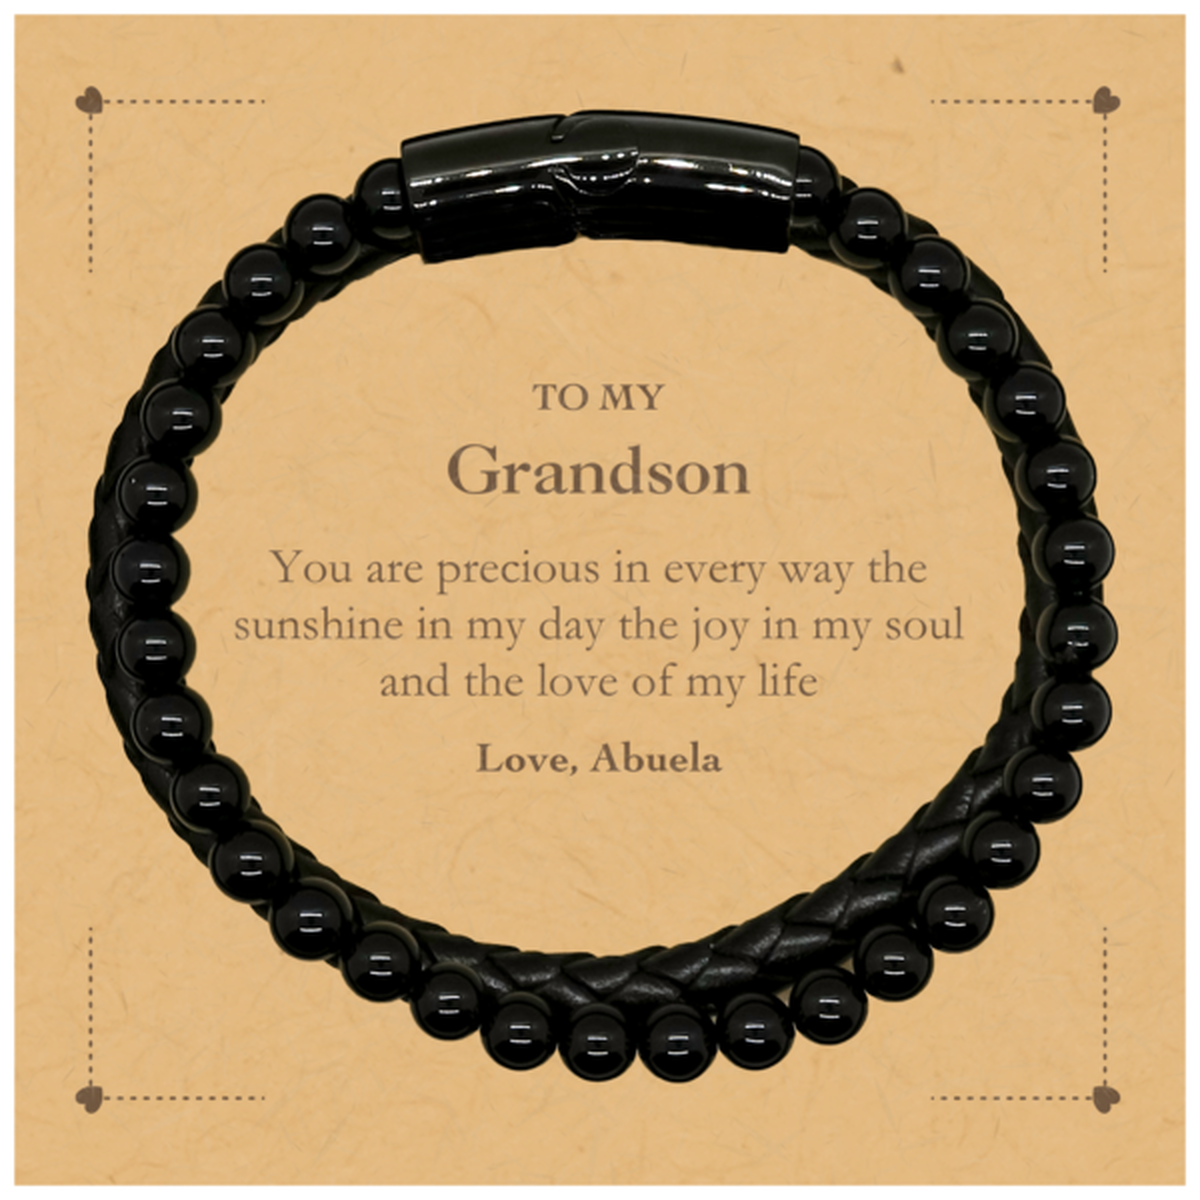 Graduation Gifts for Grandson Stone Leather Bracelets Present from Abuela, Christmas Grandson Birthday Gifts Grandson You are precious in every way the sunshine in my day. Love, Abuela